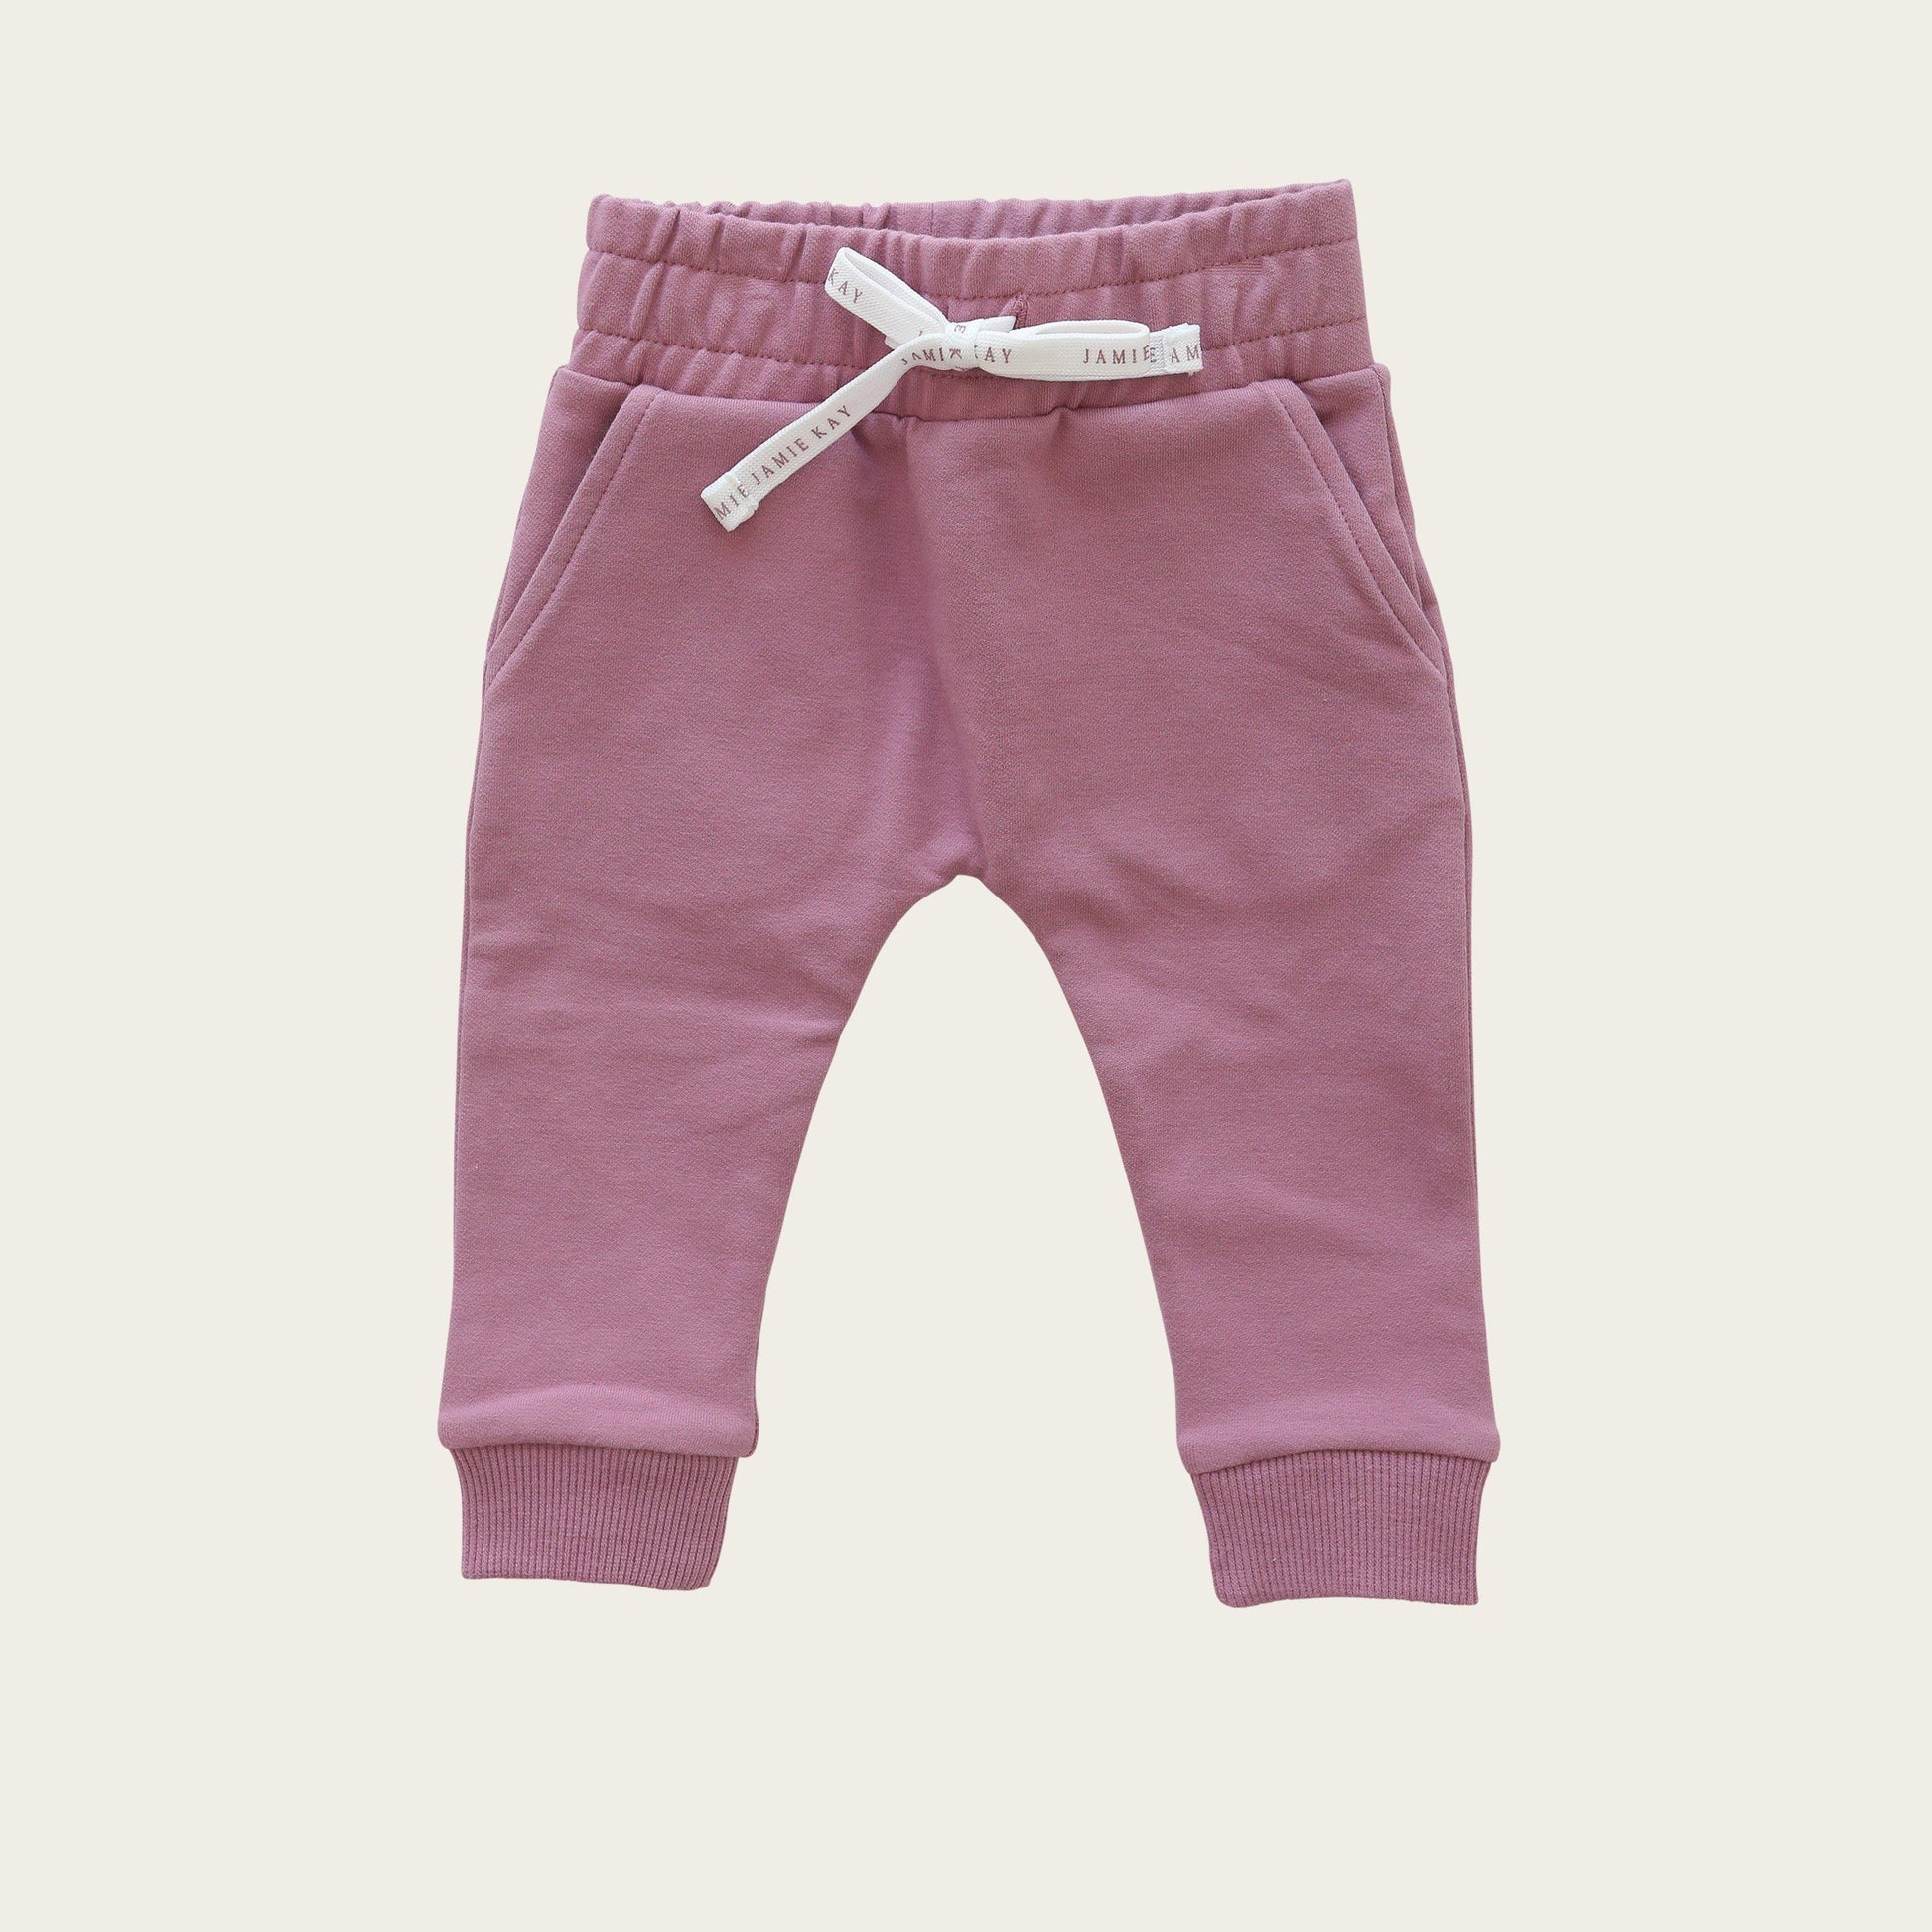 Babycharm Pants - Taille 6 - +16kg - 72 changes